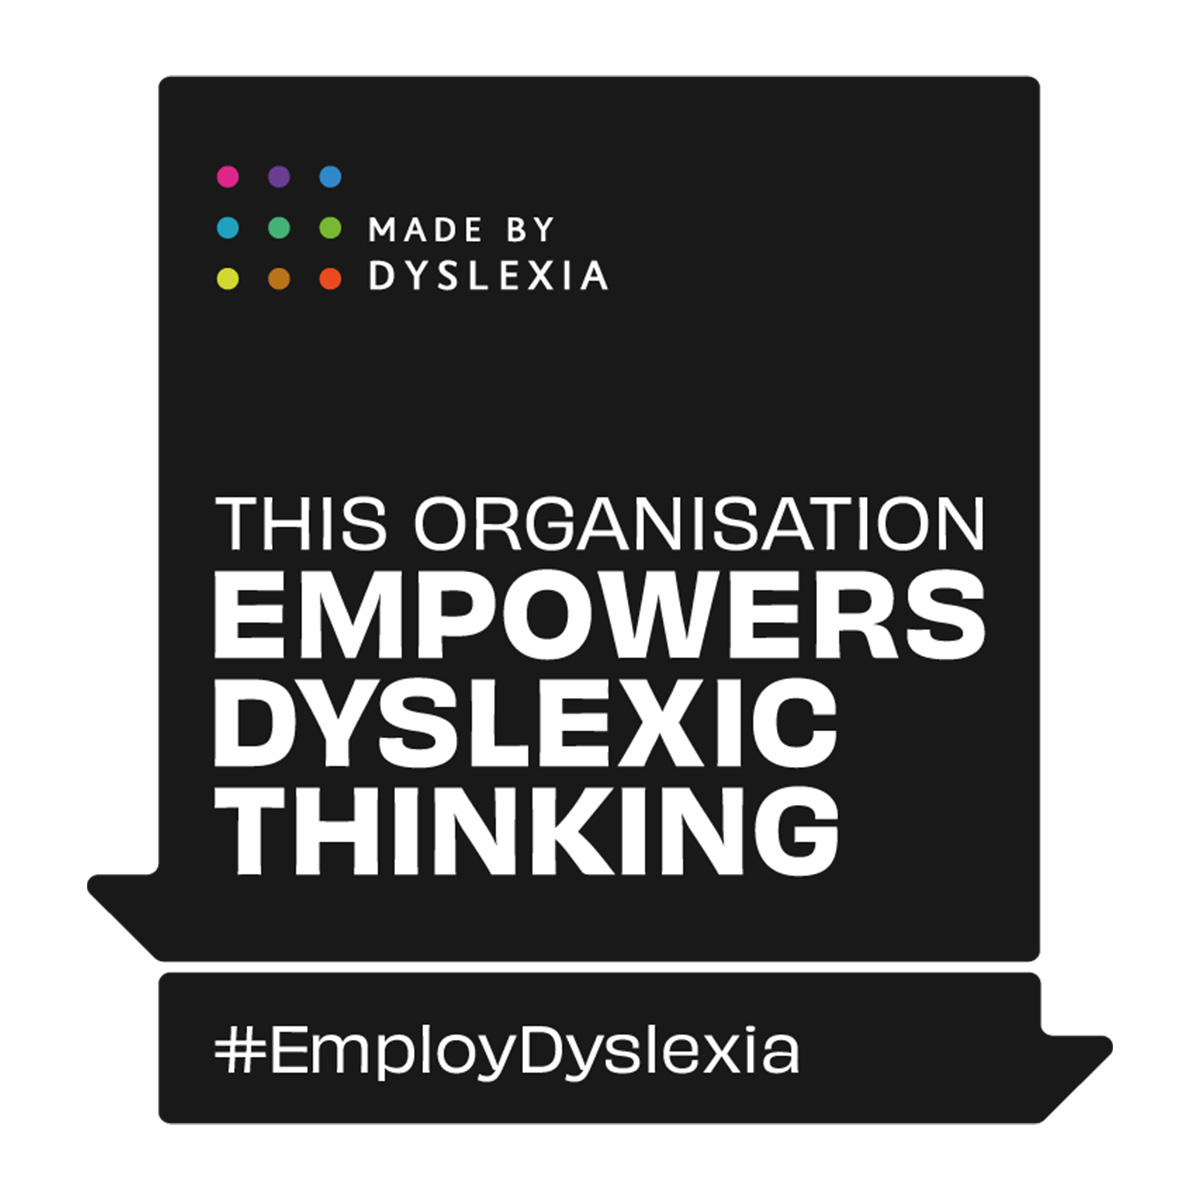 📣 Big NEWS! @virginhotels & @VirginLimitedEd have become the latest organisation to earn their Employ Dyslexia badge. Ask your organisation to take our free 1-hour training on LinkedIn Learning here: linkedin.com/learning/empow…